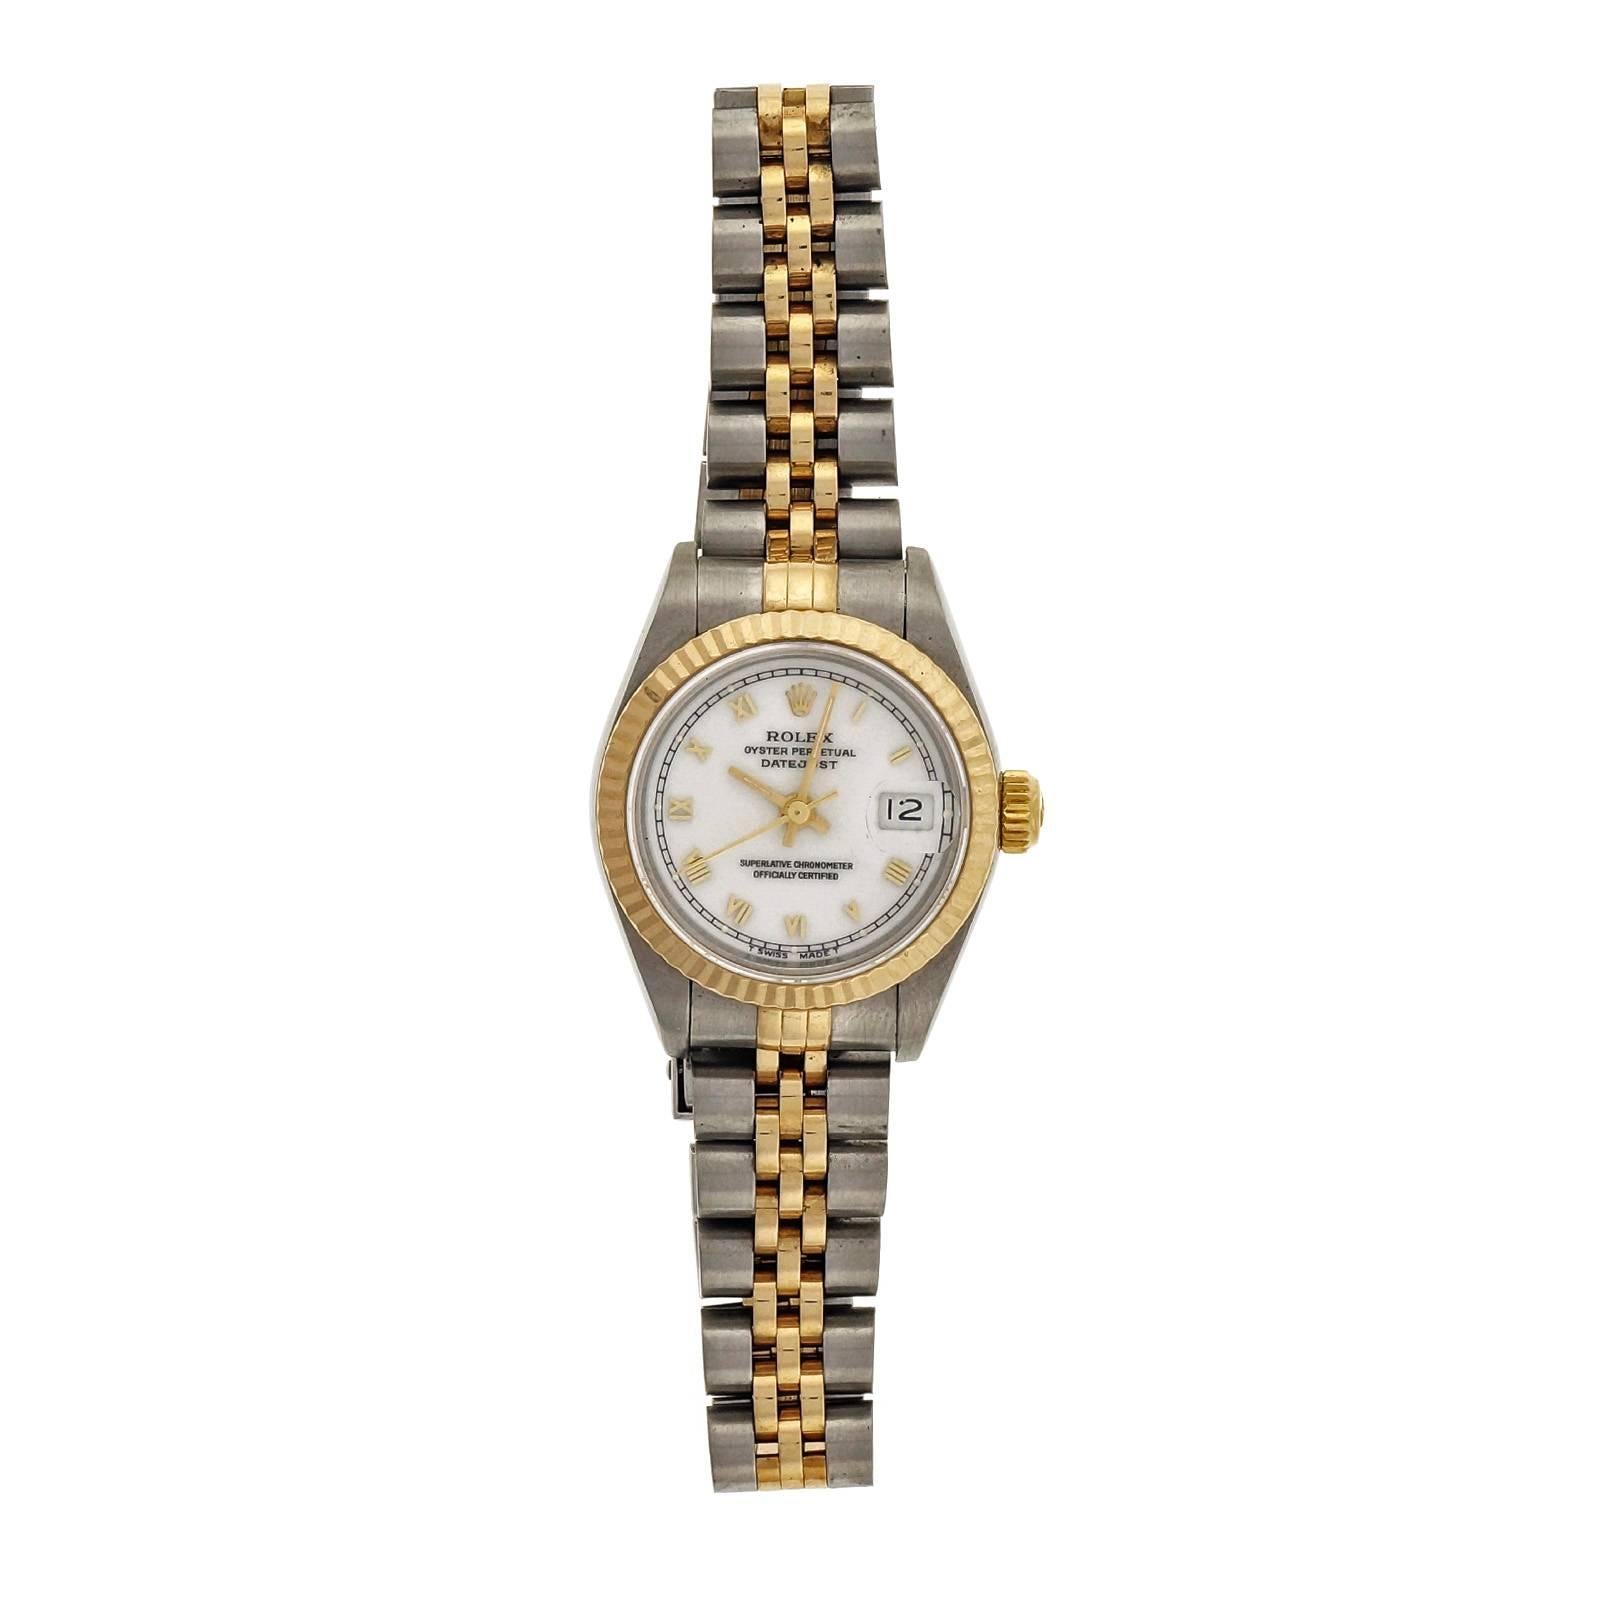  All original 1996 ladies Datejust 69173 18k yellow gold and steel watch, Jubilee band, white dial with Roman numerals. Original box and papers. Circa 1996.

18k yellow gold and steel 
57 grams 
Length: 33mm 
Strap length: 7.5 inches 
Width: